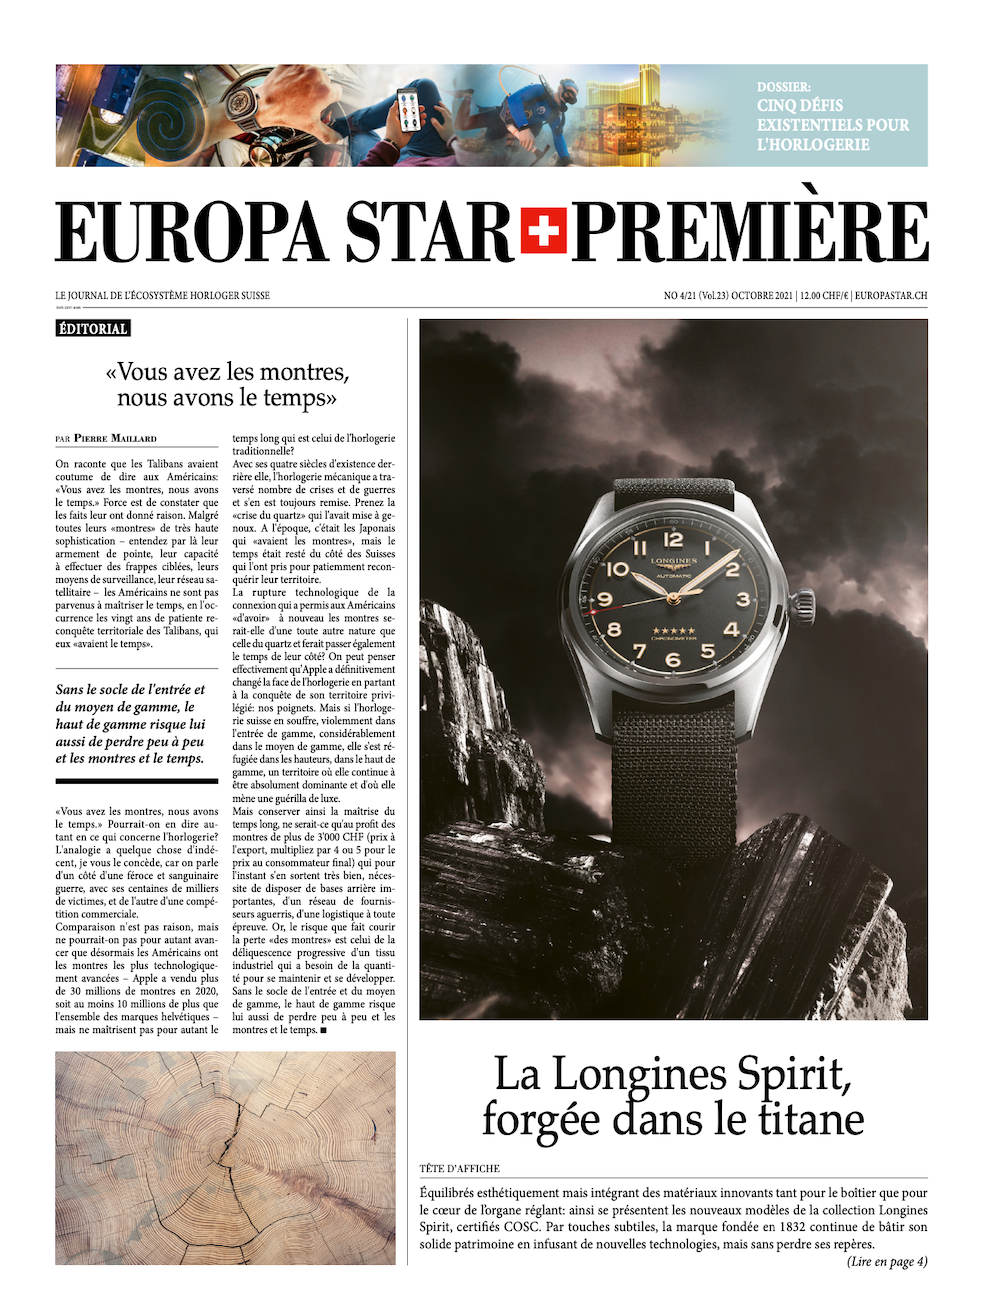 Discover the Autumn editions of Europa Star